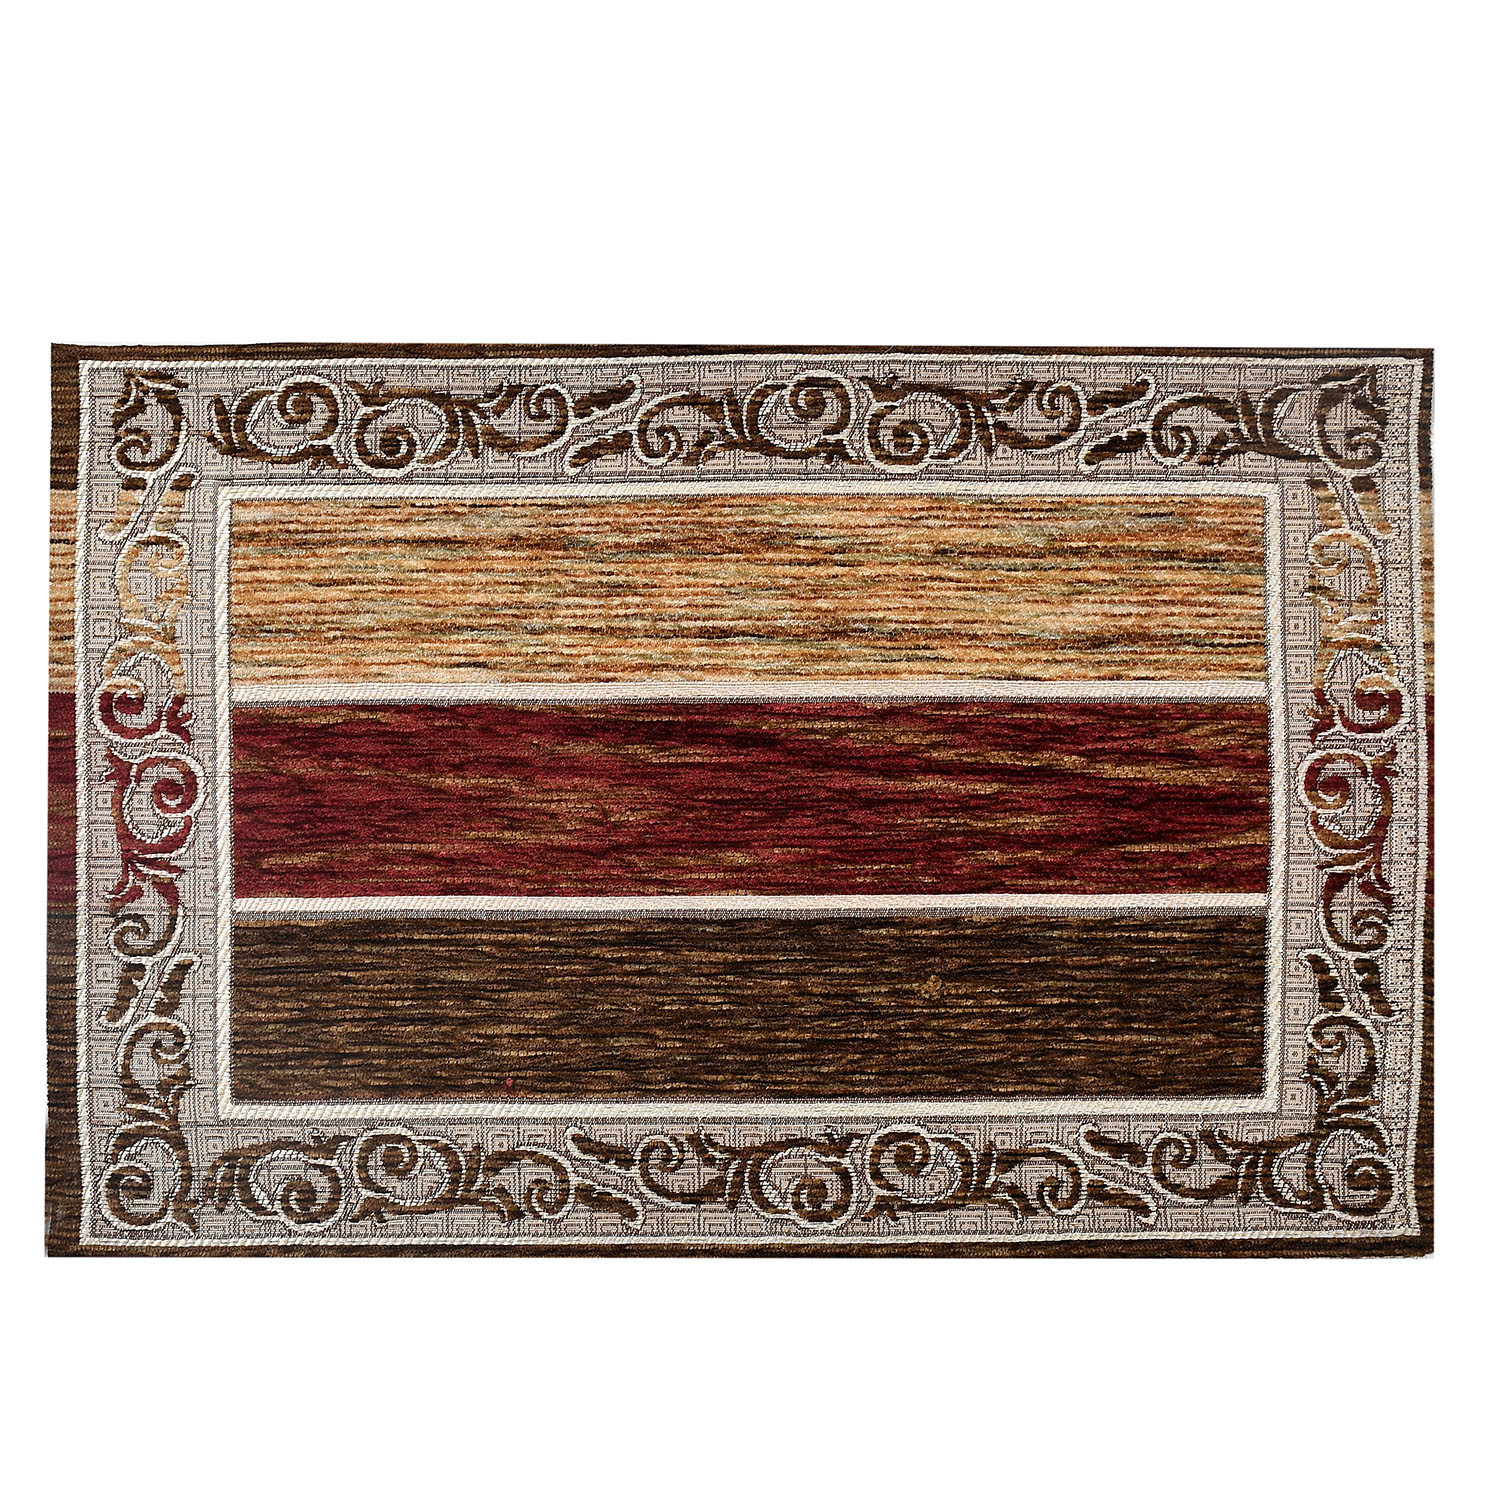 Kuber Industries Dining Table Runner Set|Rich Fabric Damask Pattern Table Mat|Multiclored Strips 6 Placemats for Restaurant & Home Decor,Set of 1 (Maroon)